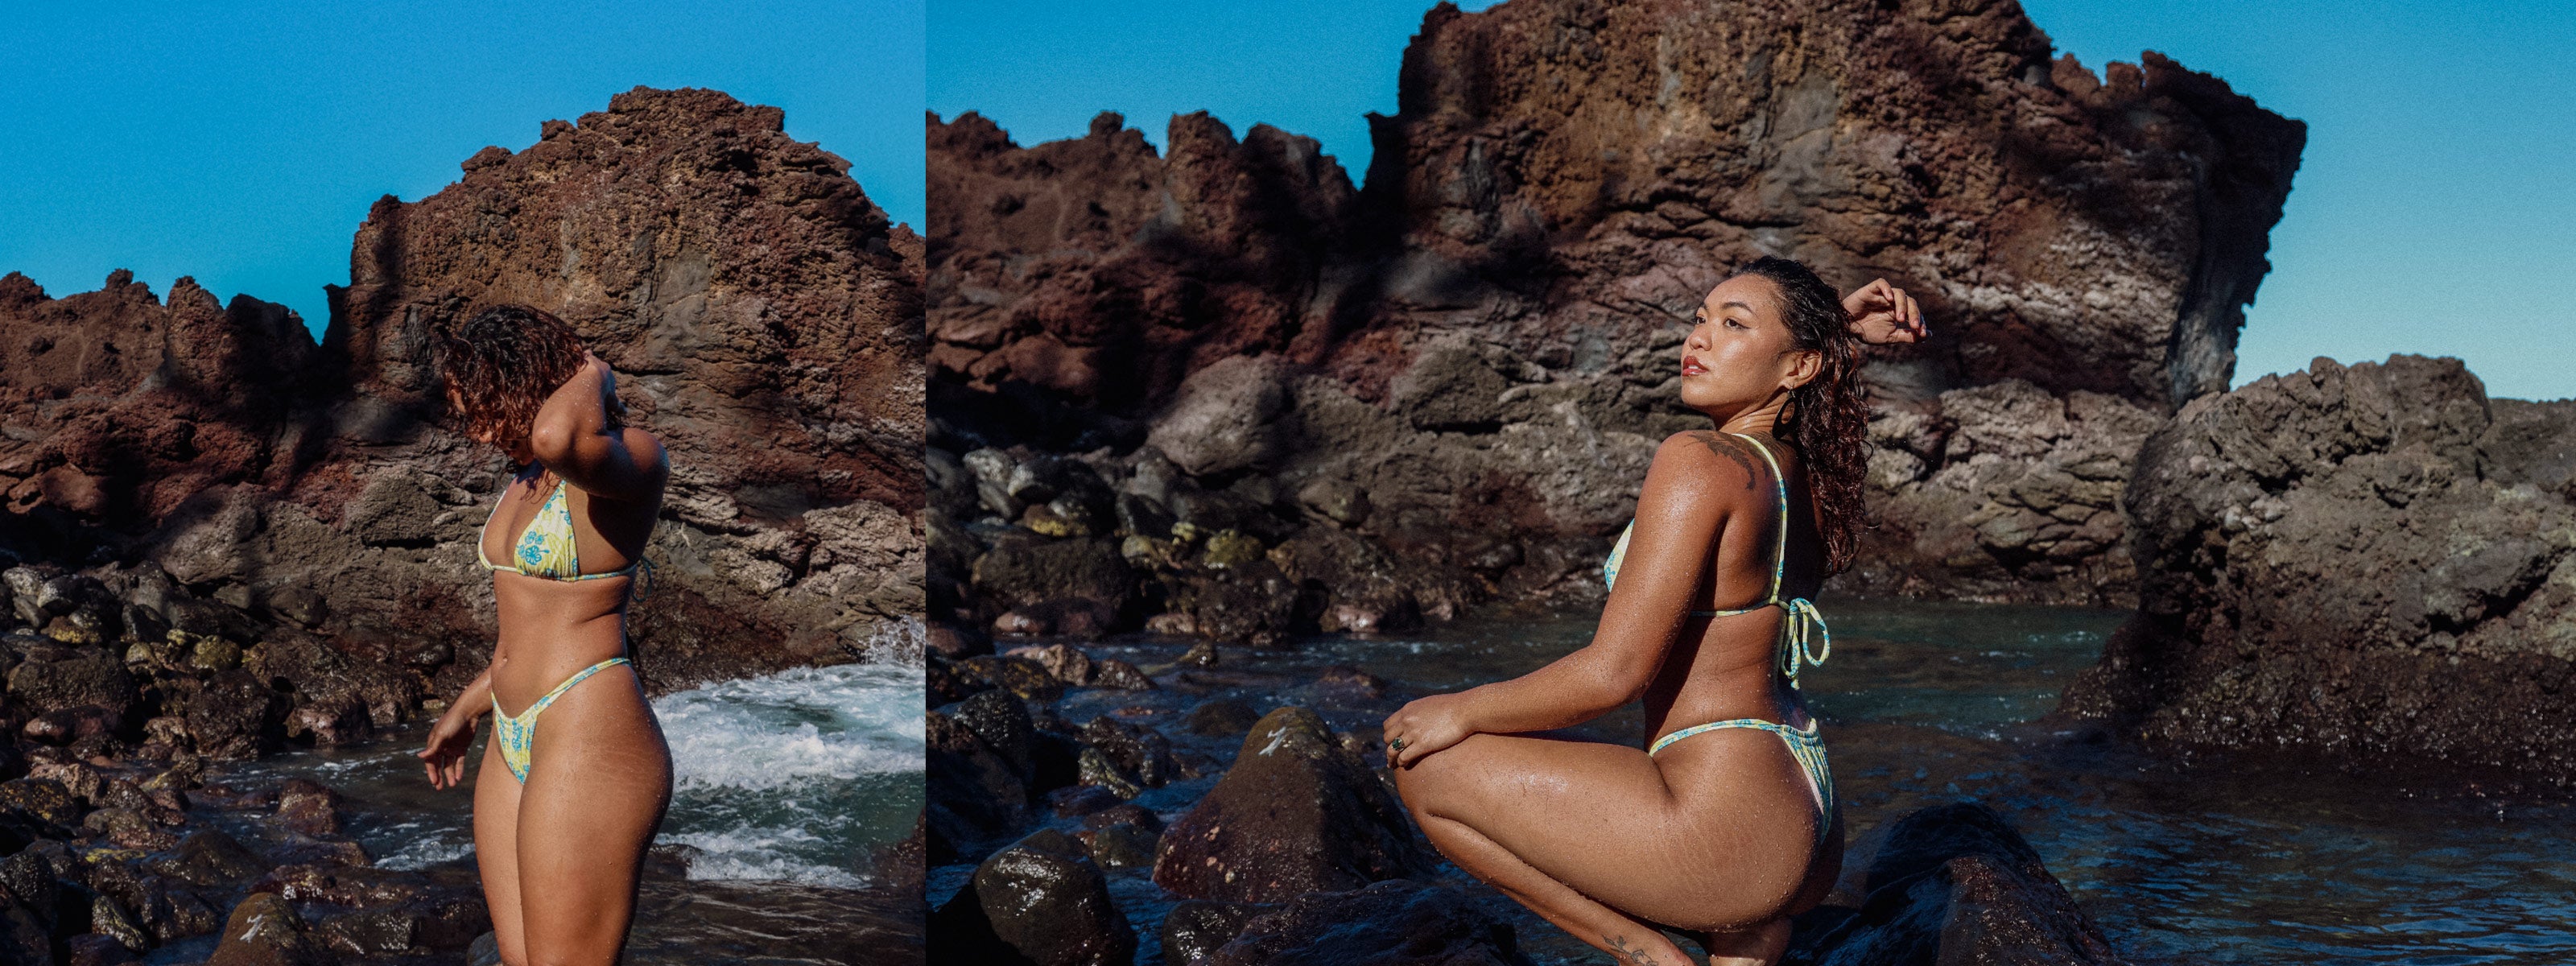 Our Love Letter to Catalina: Avalon Bikini by Tai